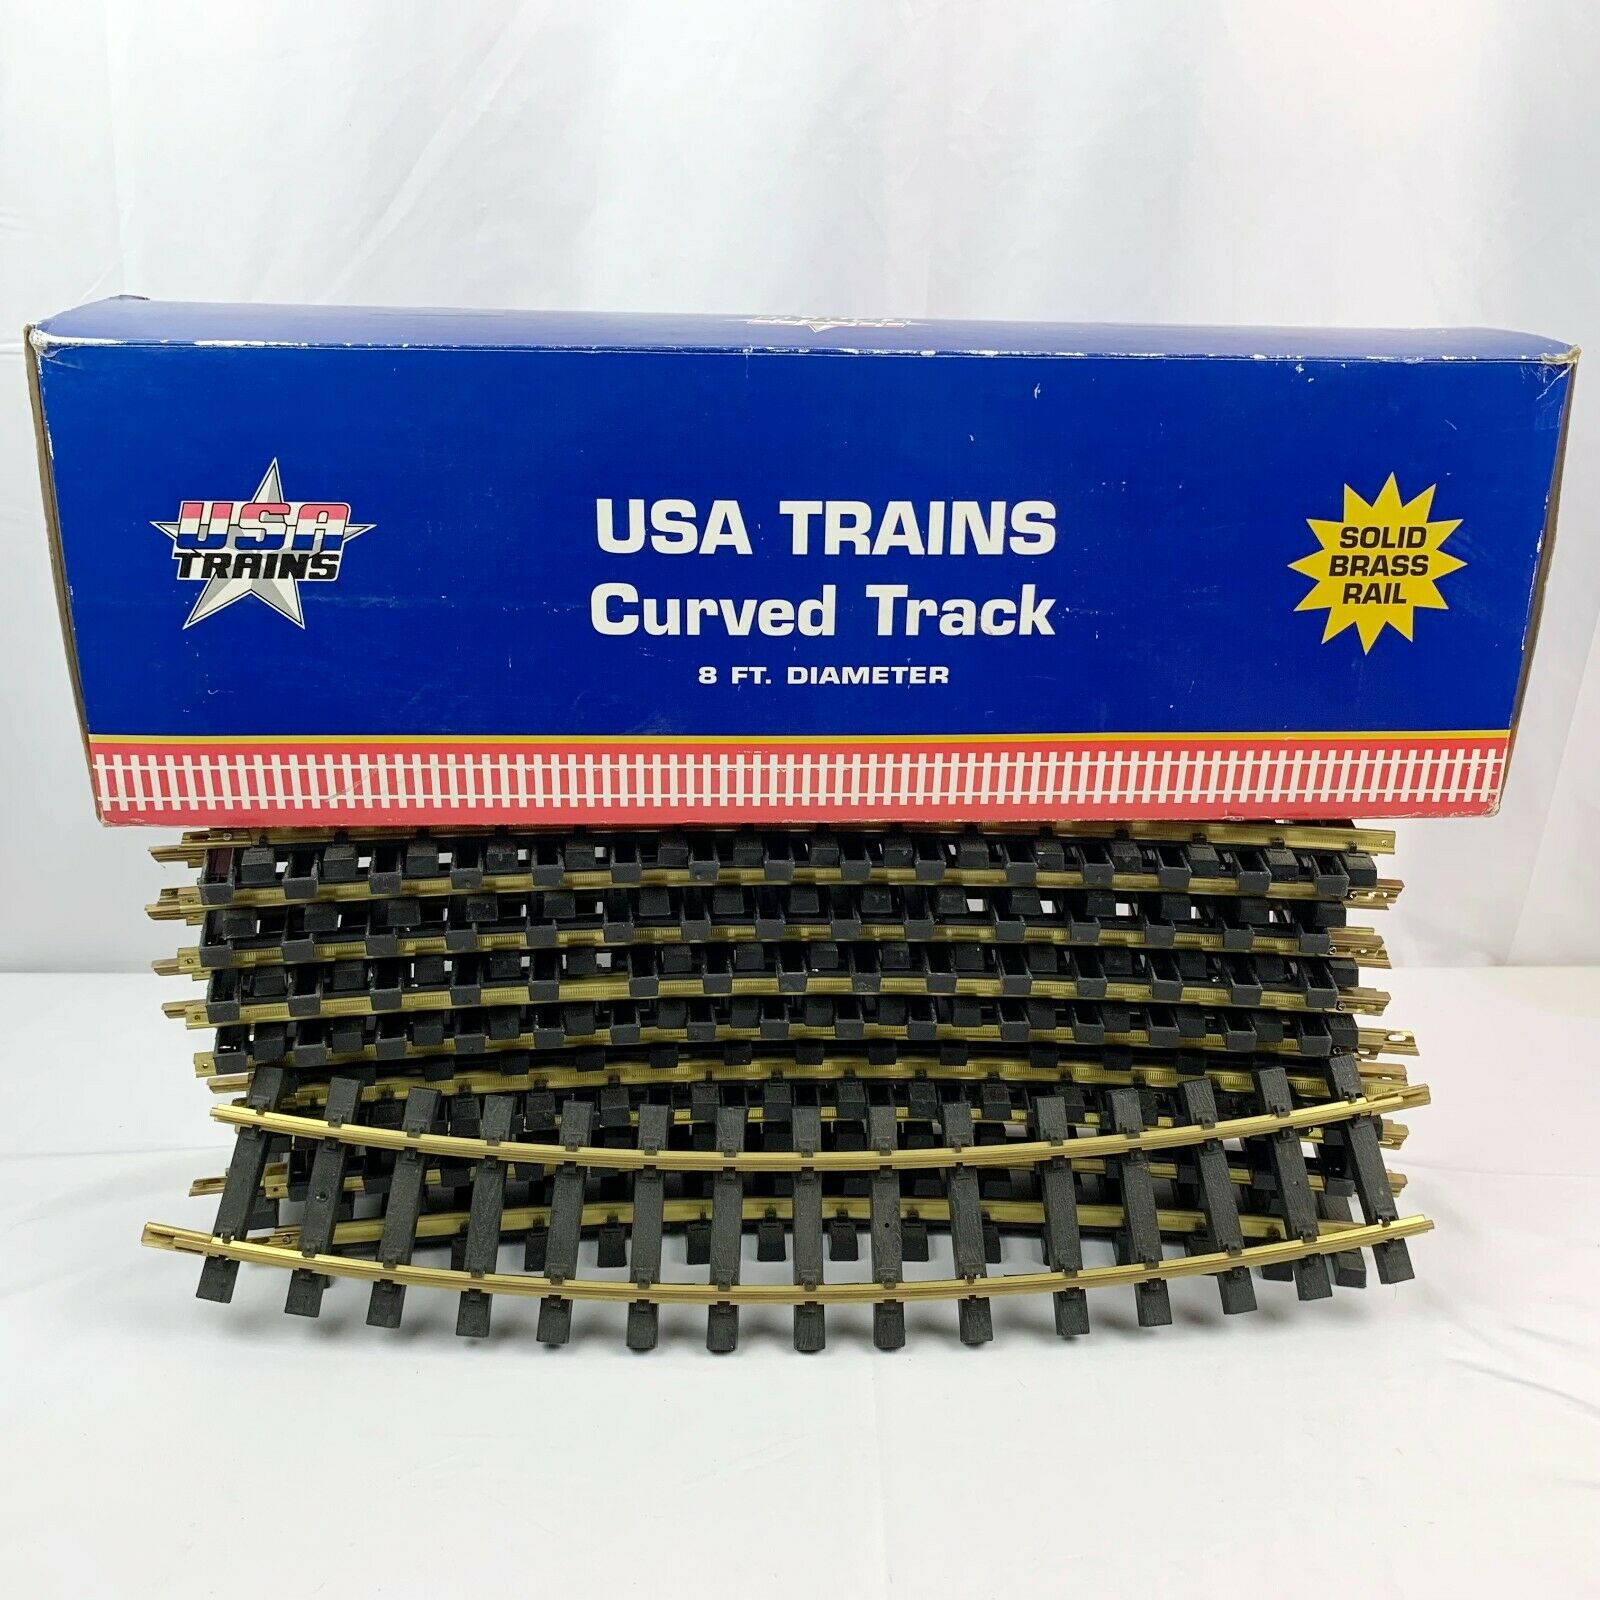 Usa Trains R81600 G 8' Diameter Curved Track Sections With Solid Brass Rails